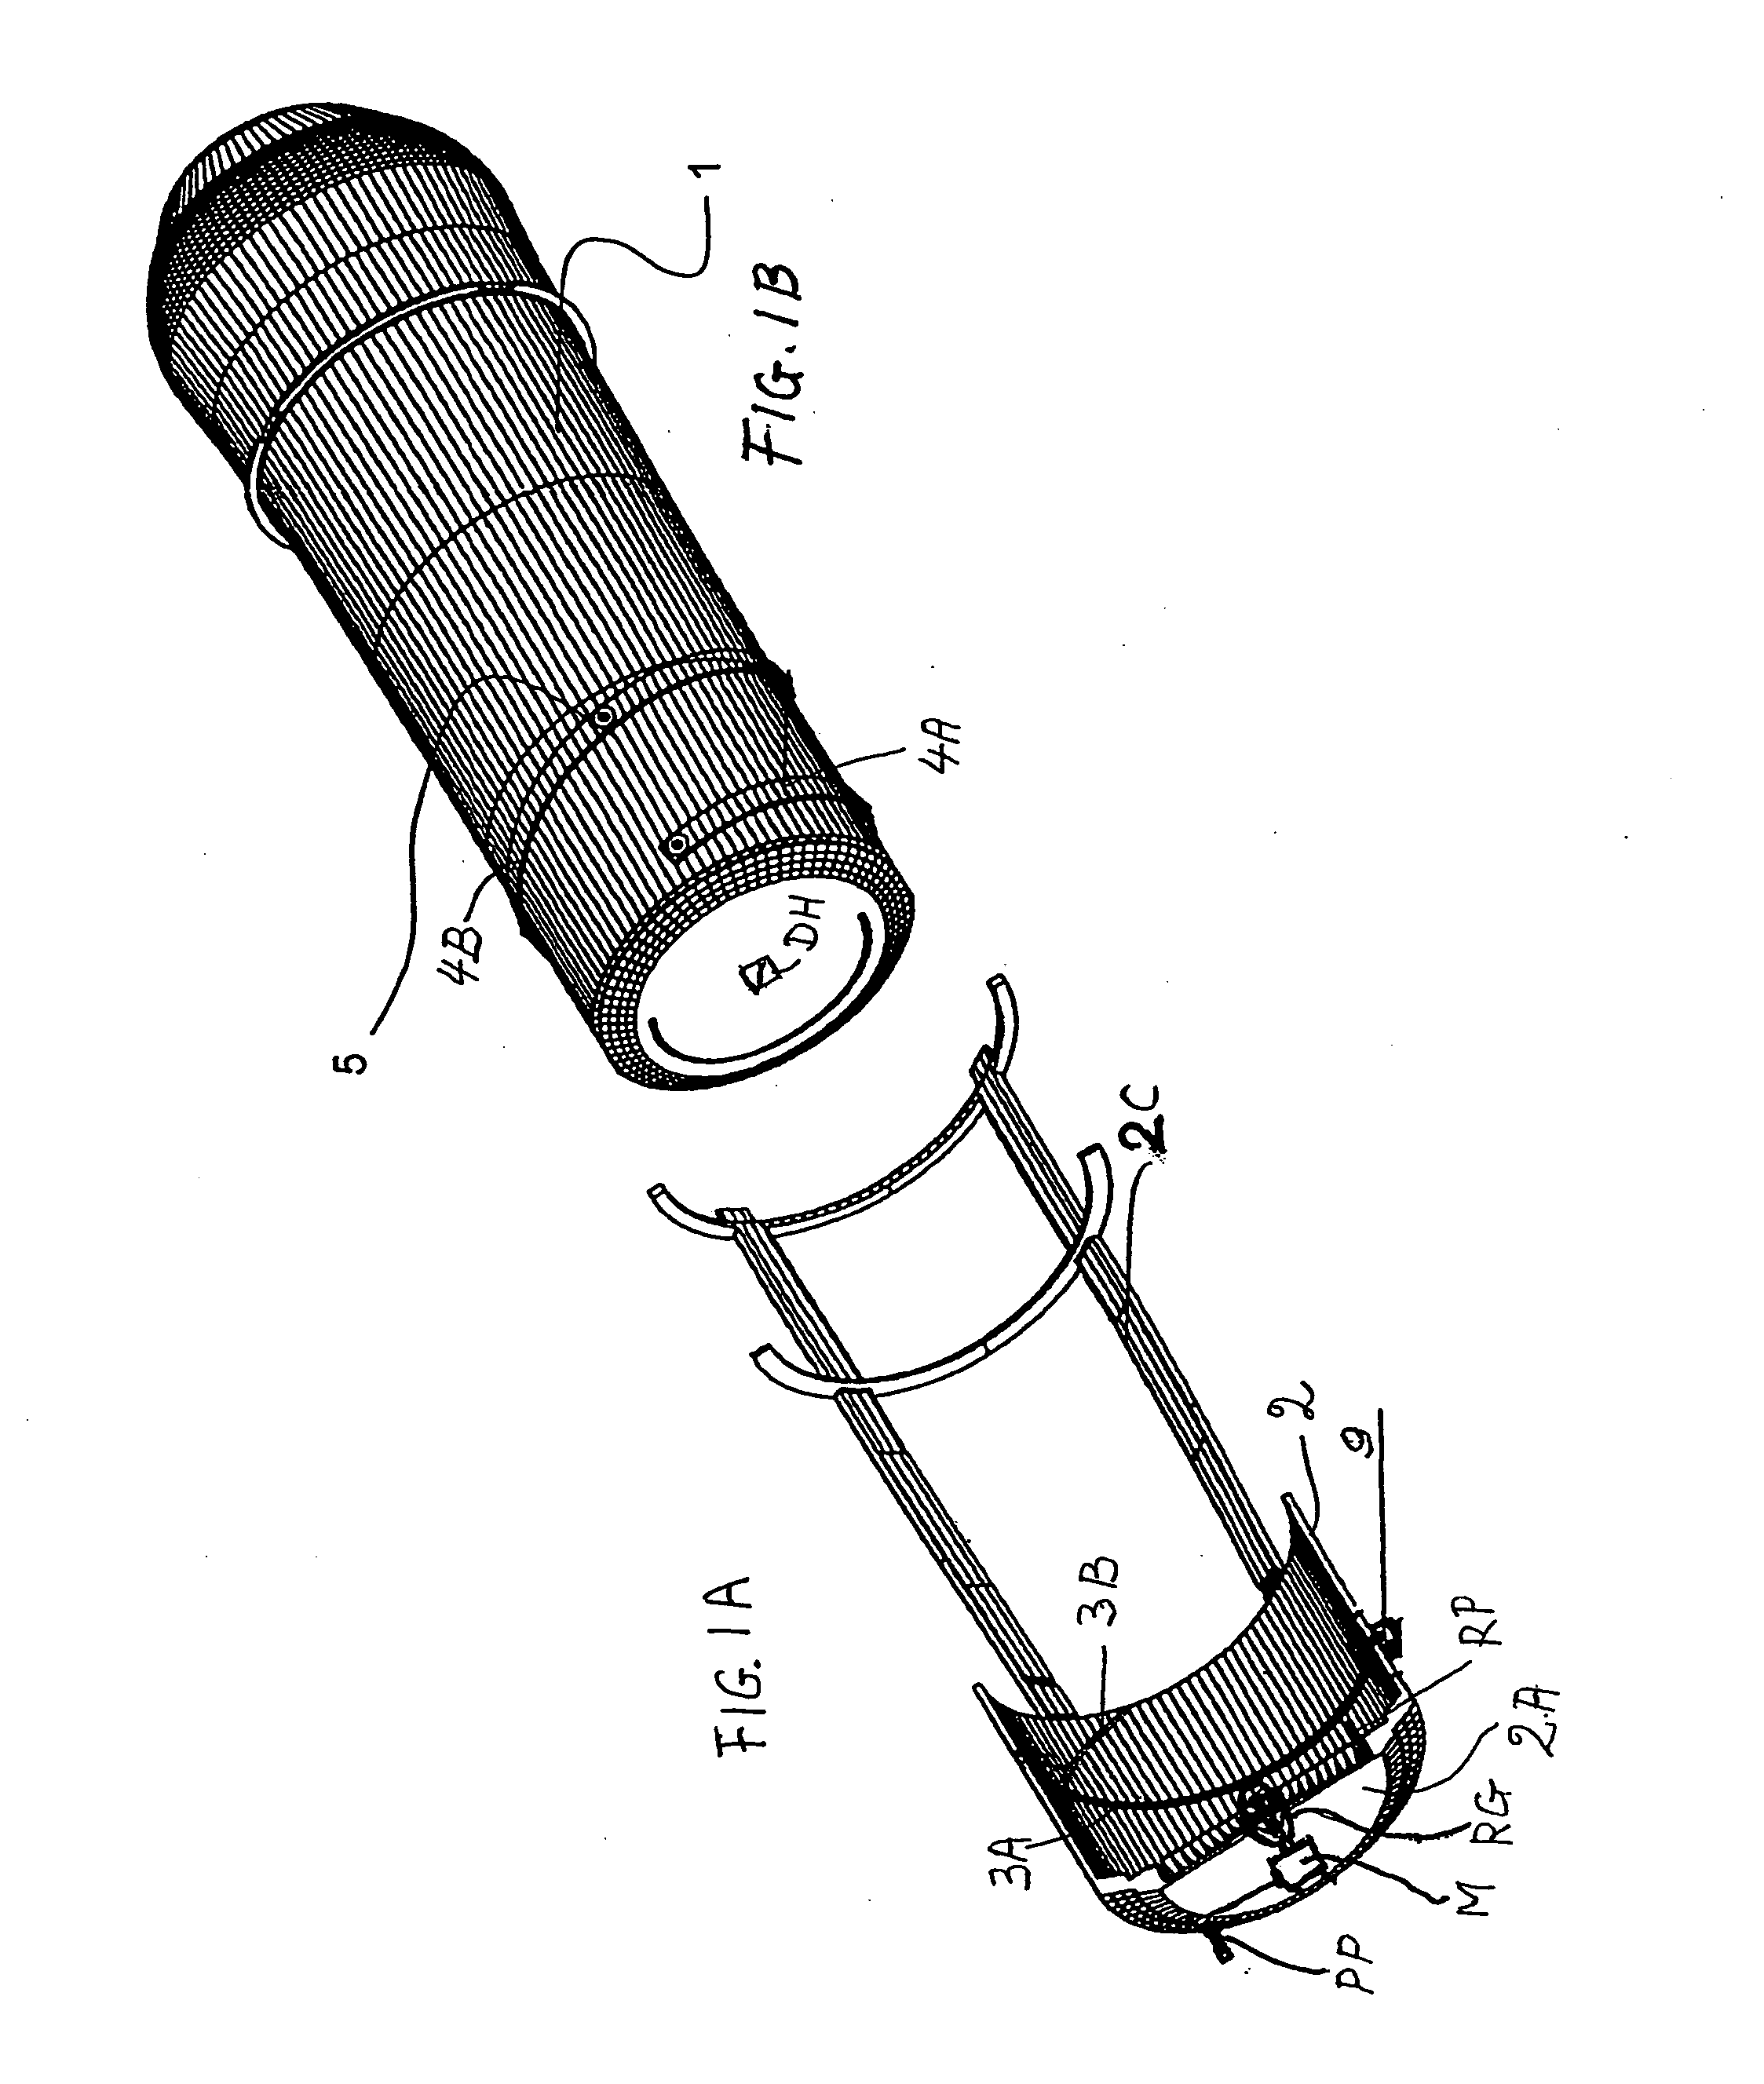 System for ejecting a spin-stabilized space flying body